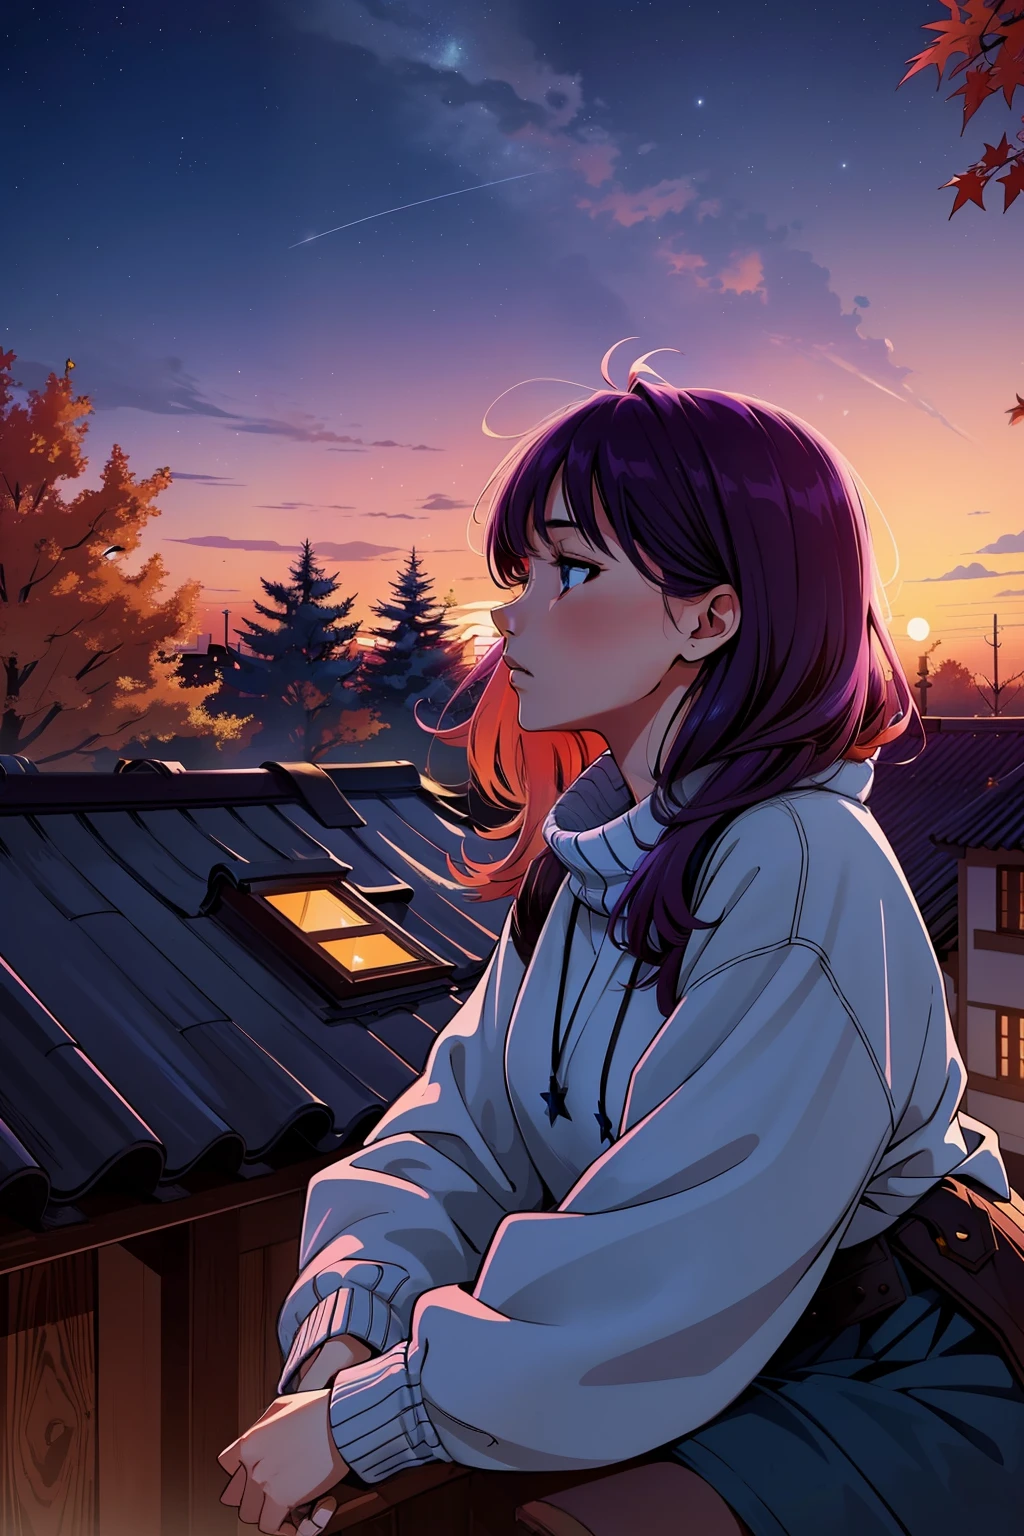 a young girls looks at the sunset 天空 from a roof, 秋天, 秋天的顏色, 樹葉, 树木, 天空, with 秋天 colors and Prussian blue, 青色, 群青, 紫紅色, 紫色的, 很多明星